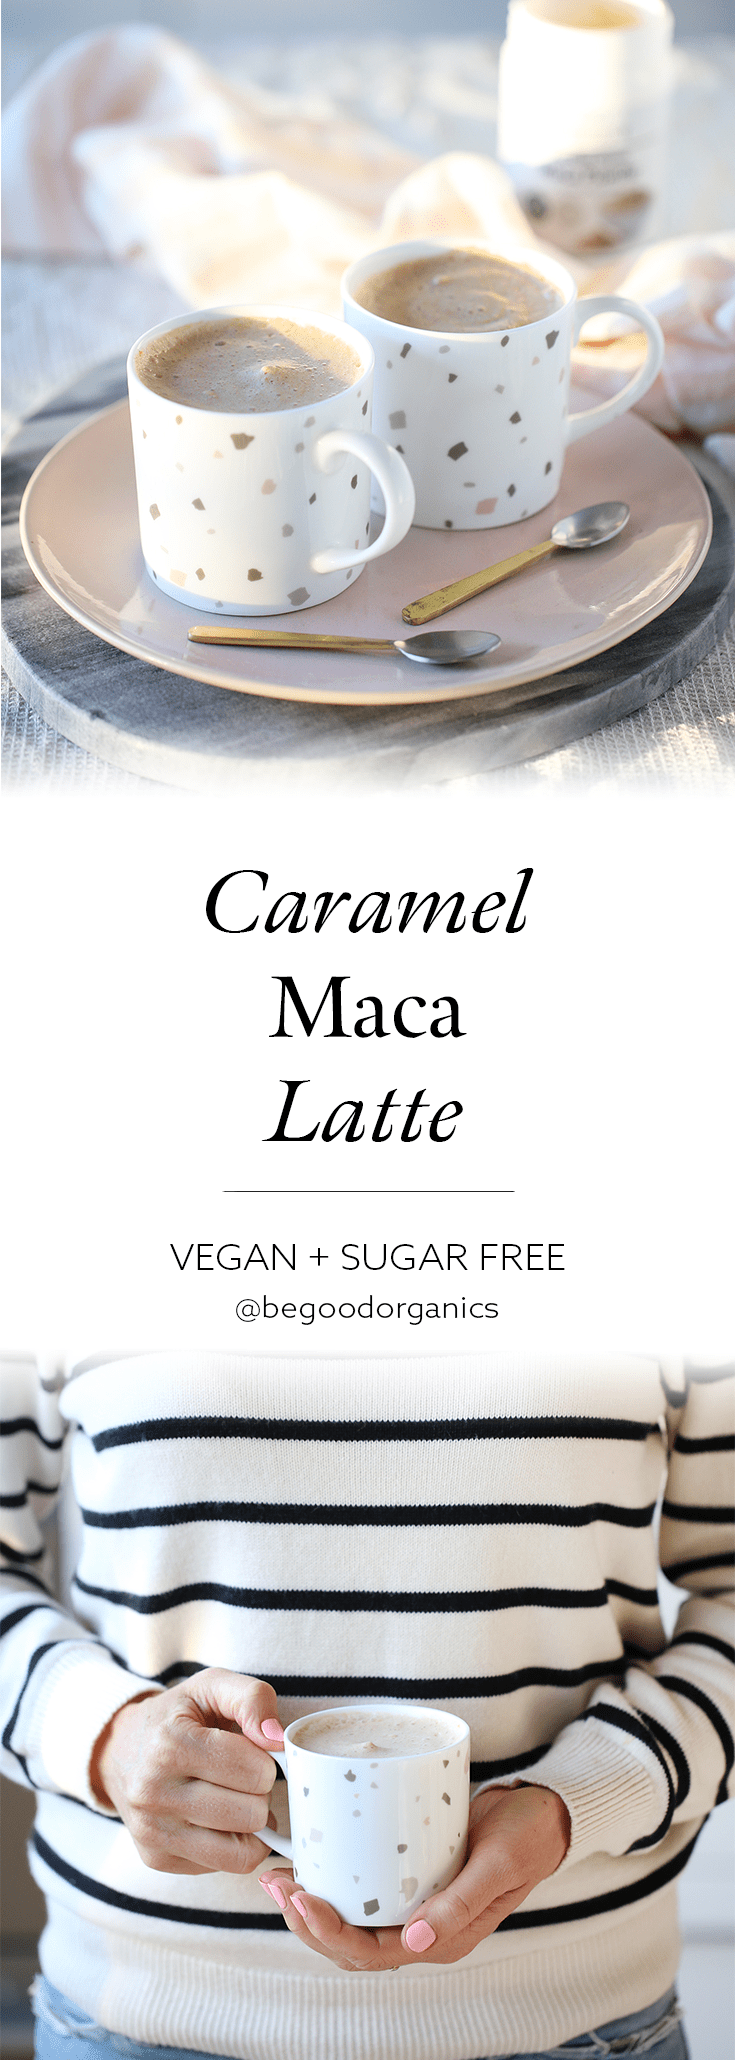 What do you get when you combine dates with maca First name / my friend? Caramel. Not the sickly kind – I’m talking earthy, malty, bear-hug caramel, the type that makes you feel like you’ve just put on an oversized woolly jumper.